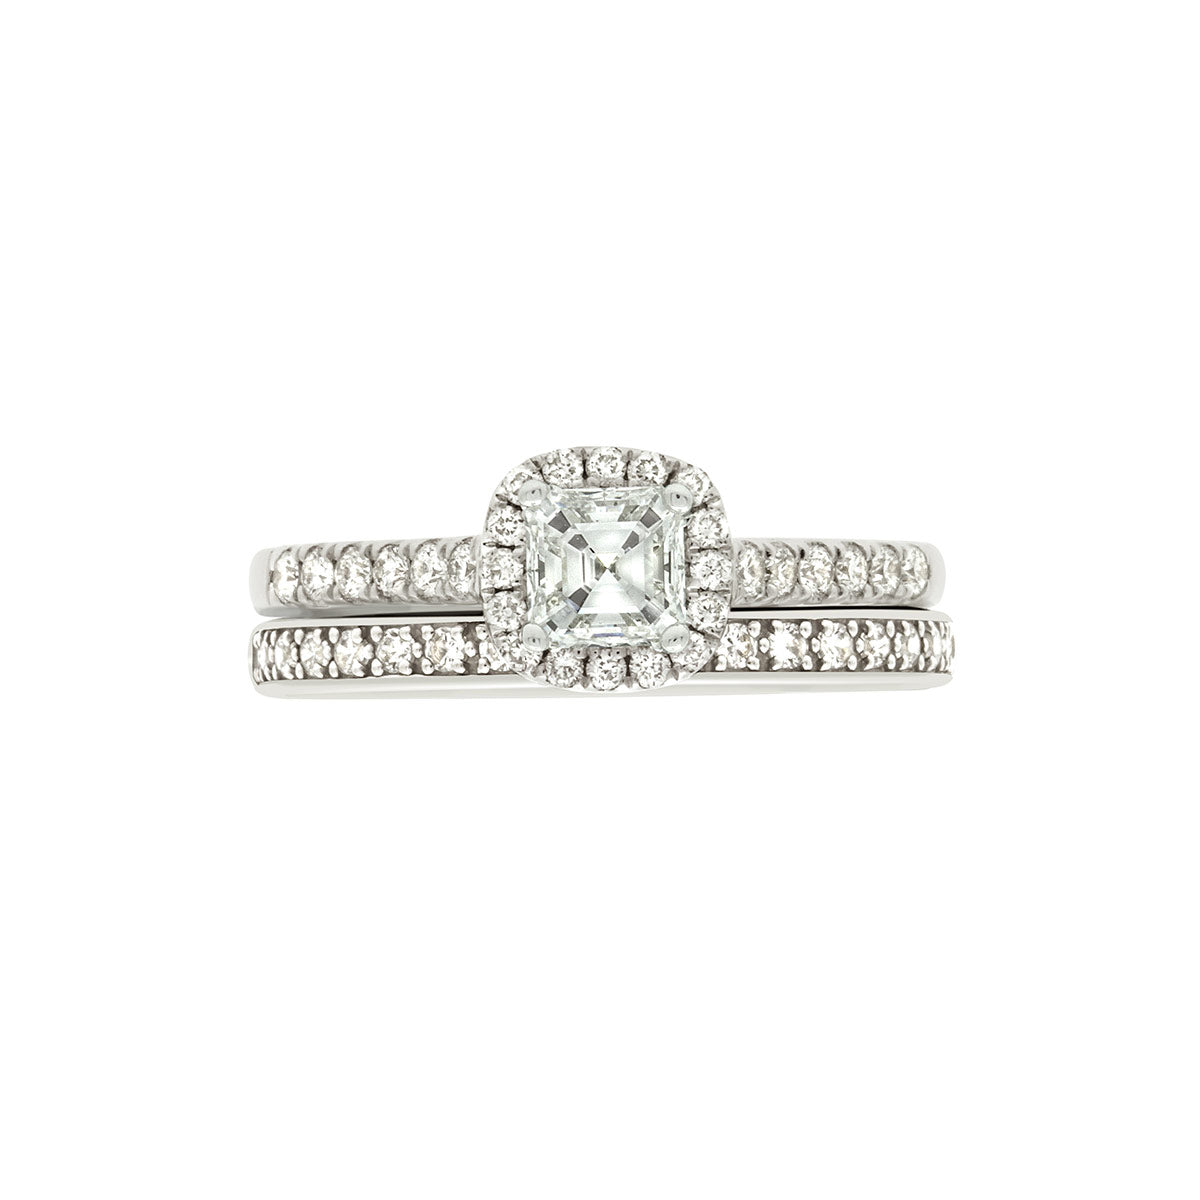 Asscher Halo Diamond Ring in white gold pictured with a diamond wedding ring